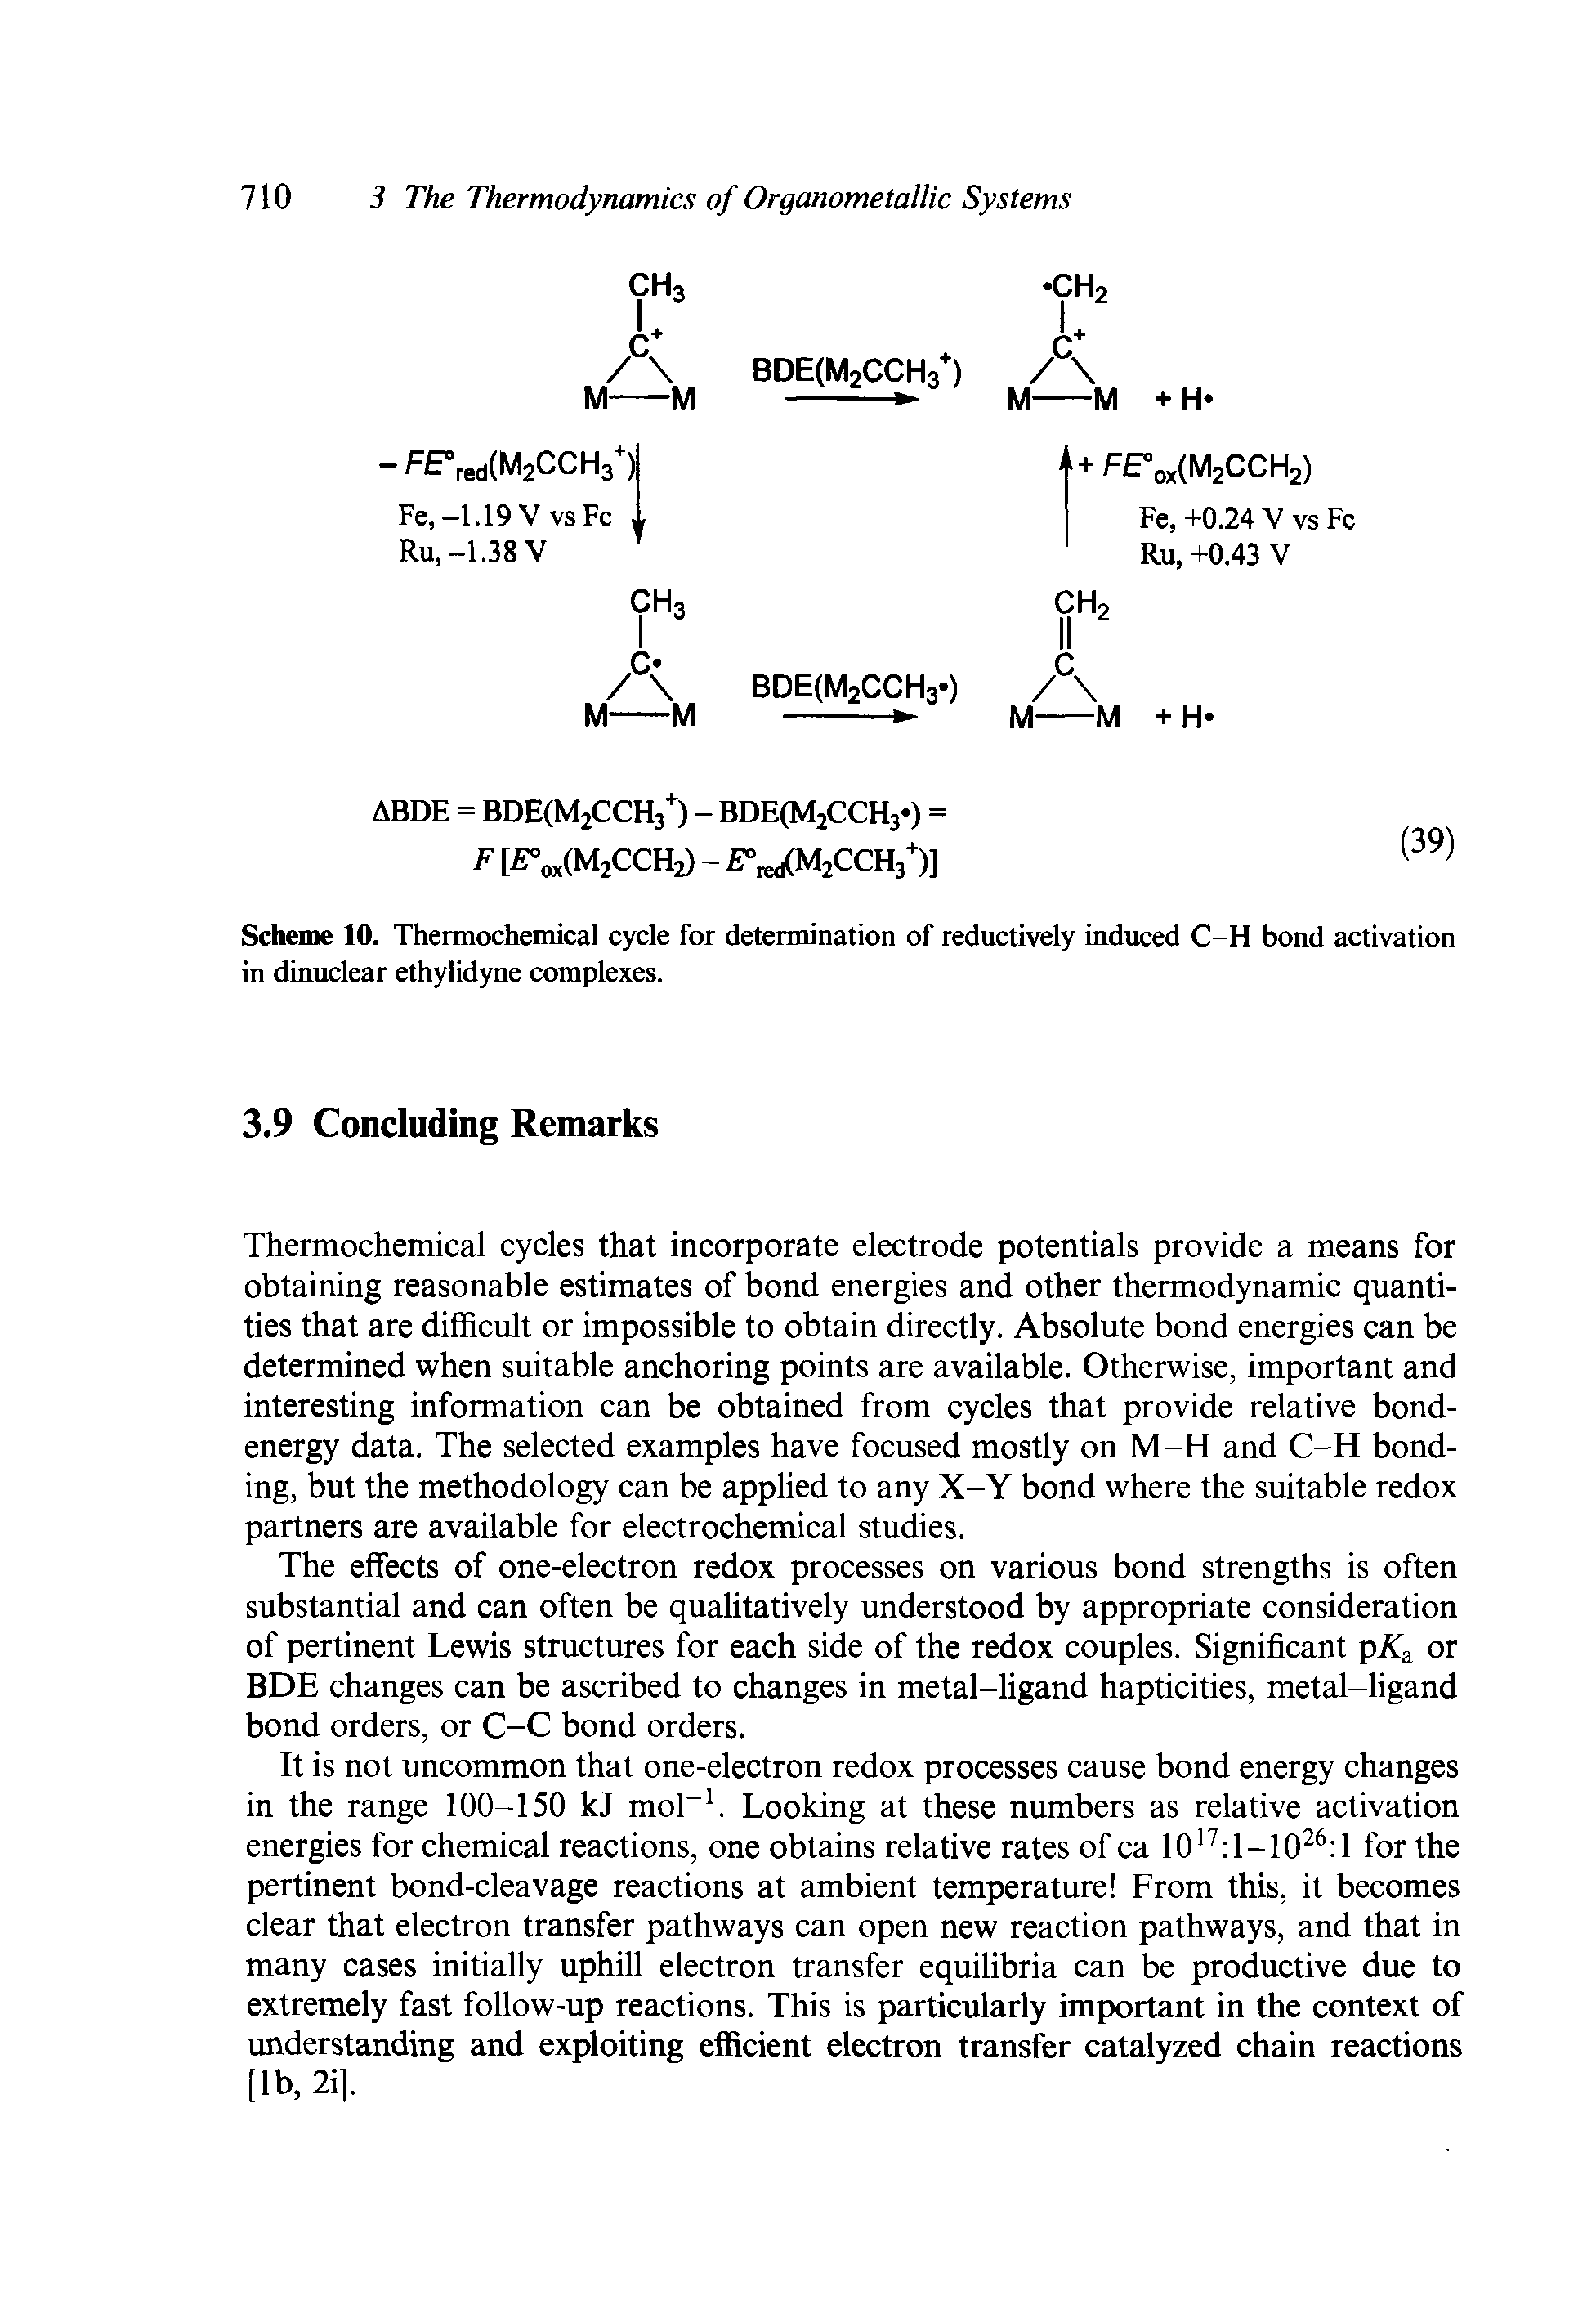 Scheme 10. Thermochemical cycle for determination of reductively induced C-H bond activation in dinuclear ethylidyne complexes.